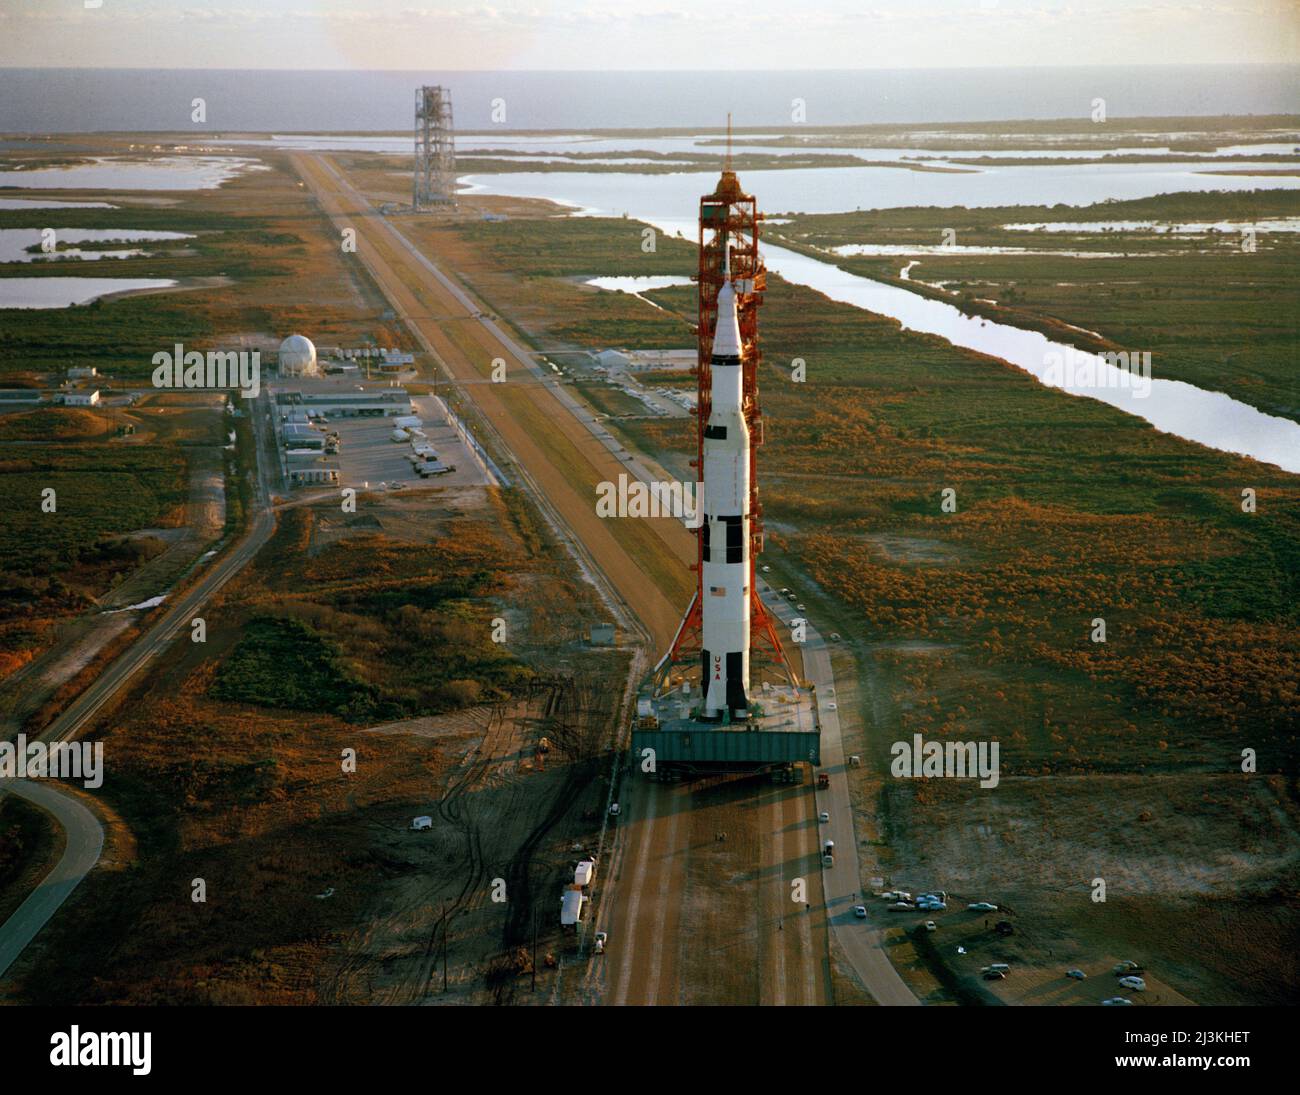 The Apollo 9 Saturn V rocket during rollout from the Vehicle Assembly Building to the launch pad. Stock Photo